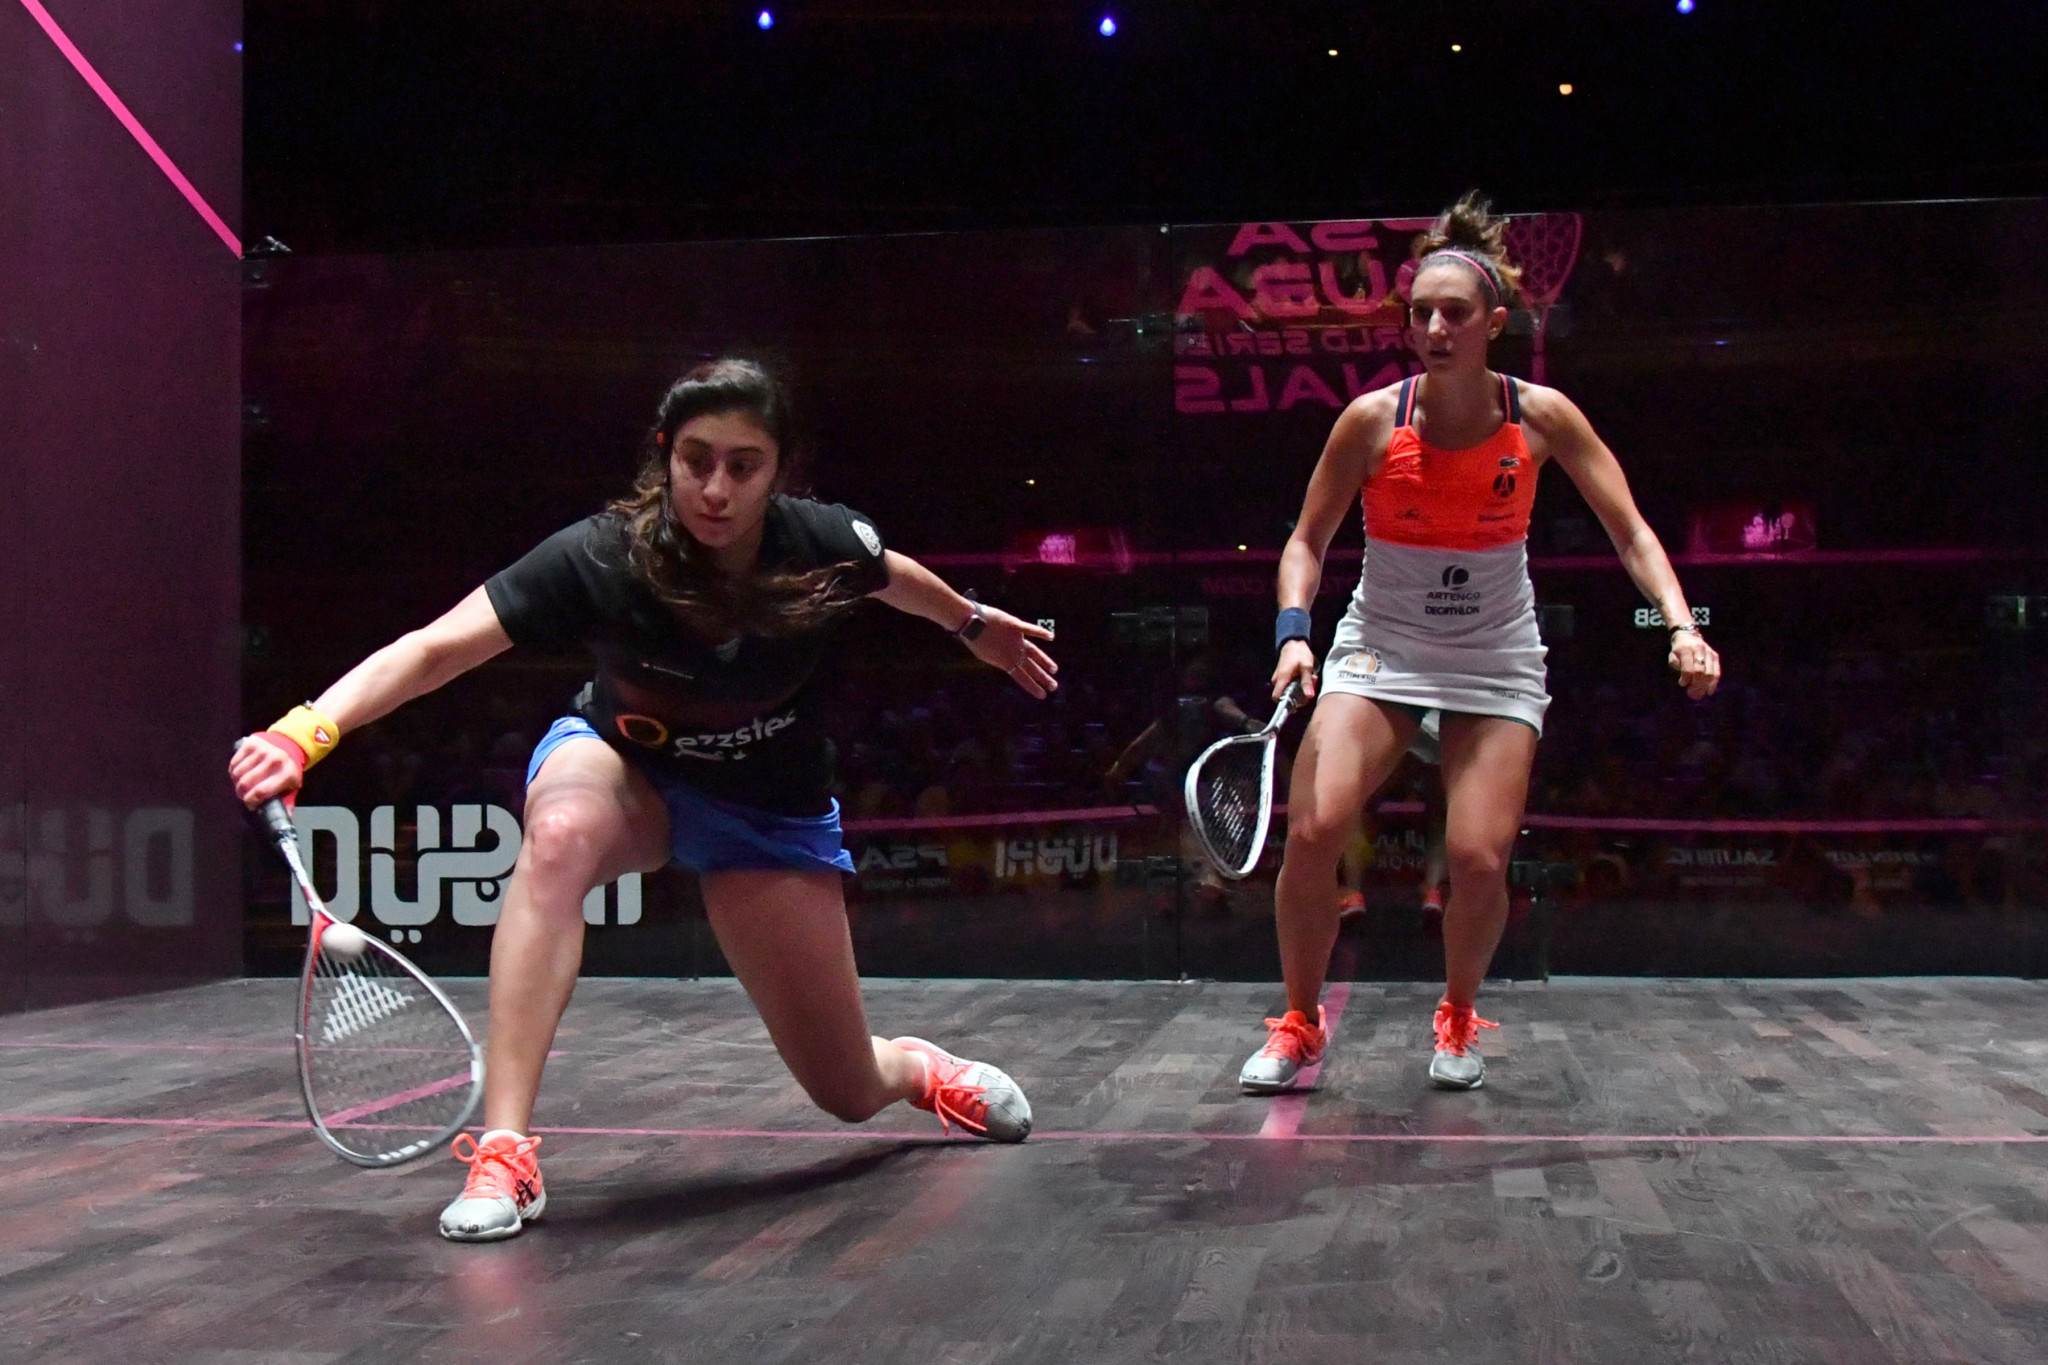 Nour El Sherbini, left, and Camille Serme are the top two in the women's rankings ©Getty Images